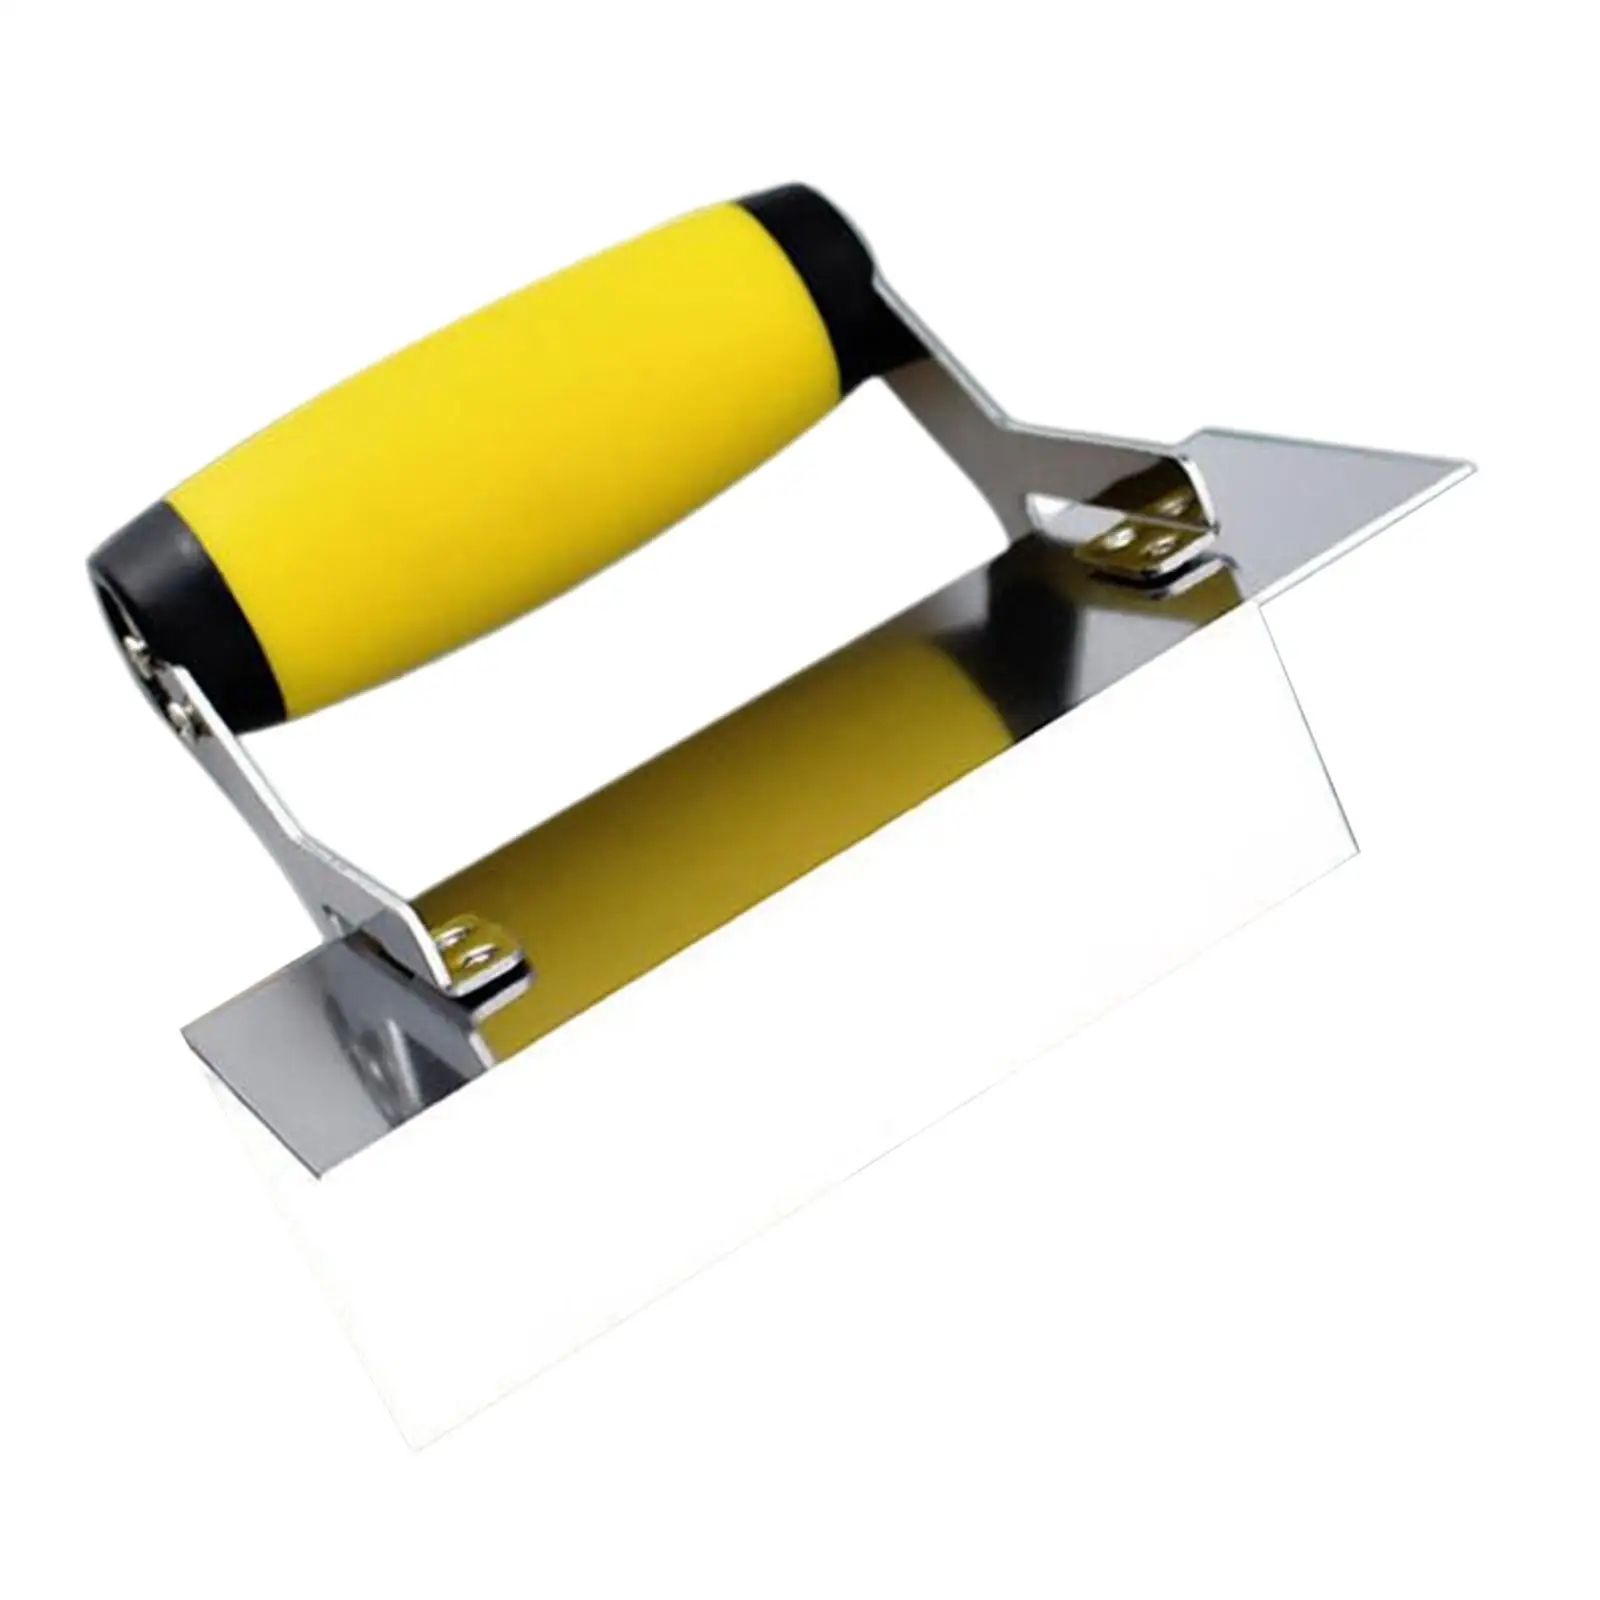 Drywall Corner Shaping Tool Steel with Handle Durable for Scraping